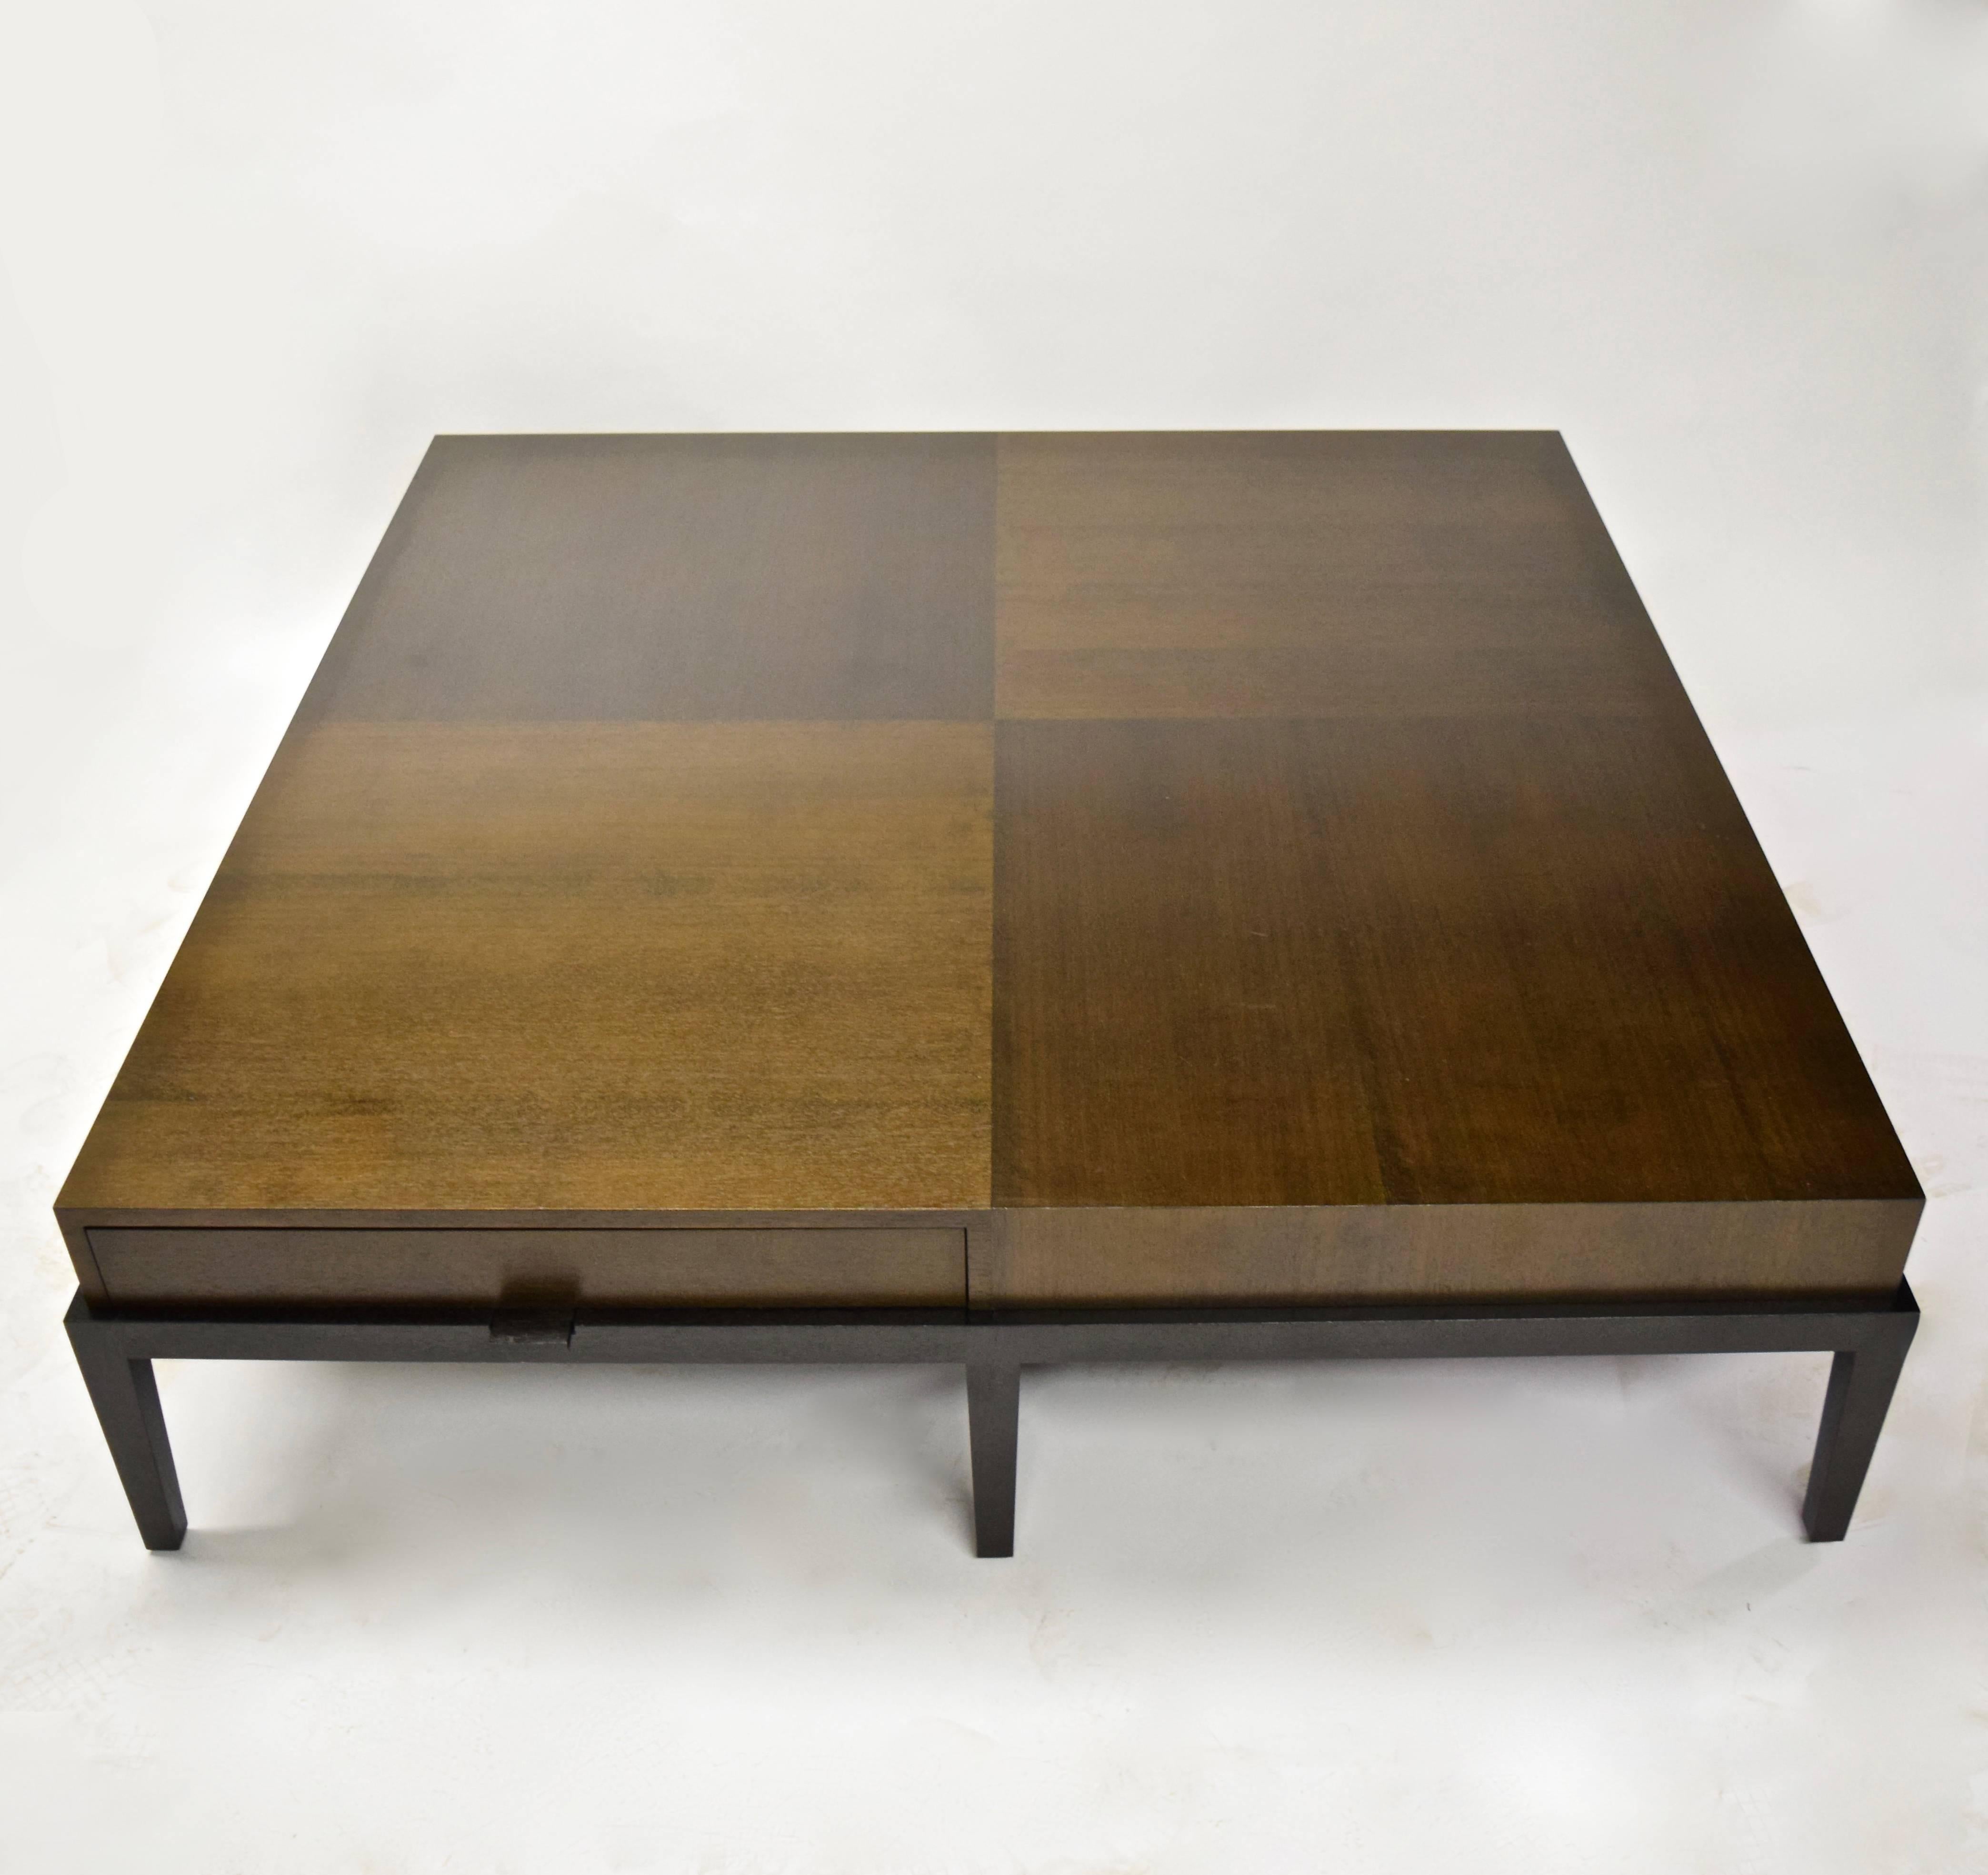 Large coffee table has a square walnut top divided into four sections each with opposite wood grain for a checkered visual detail. The 58 1/2 inch top has two drawers each with solid patinated bronze pulls, all resting on a solid wood base with